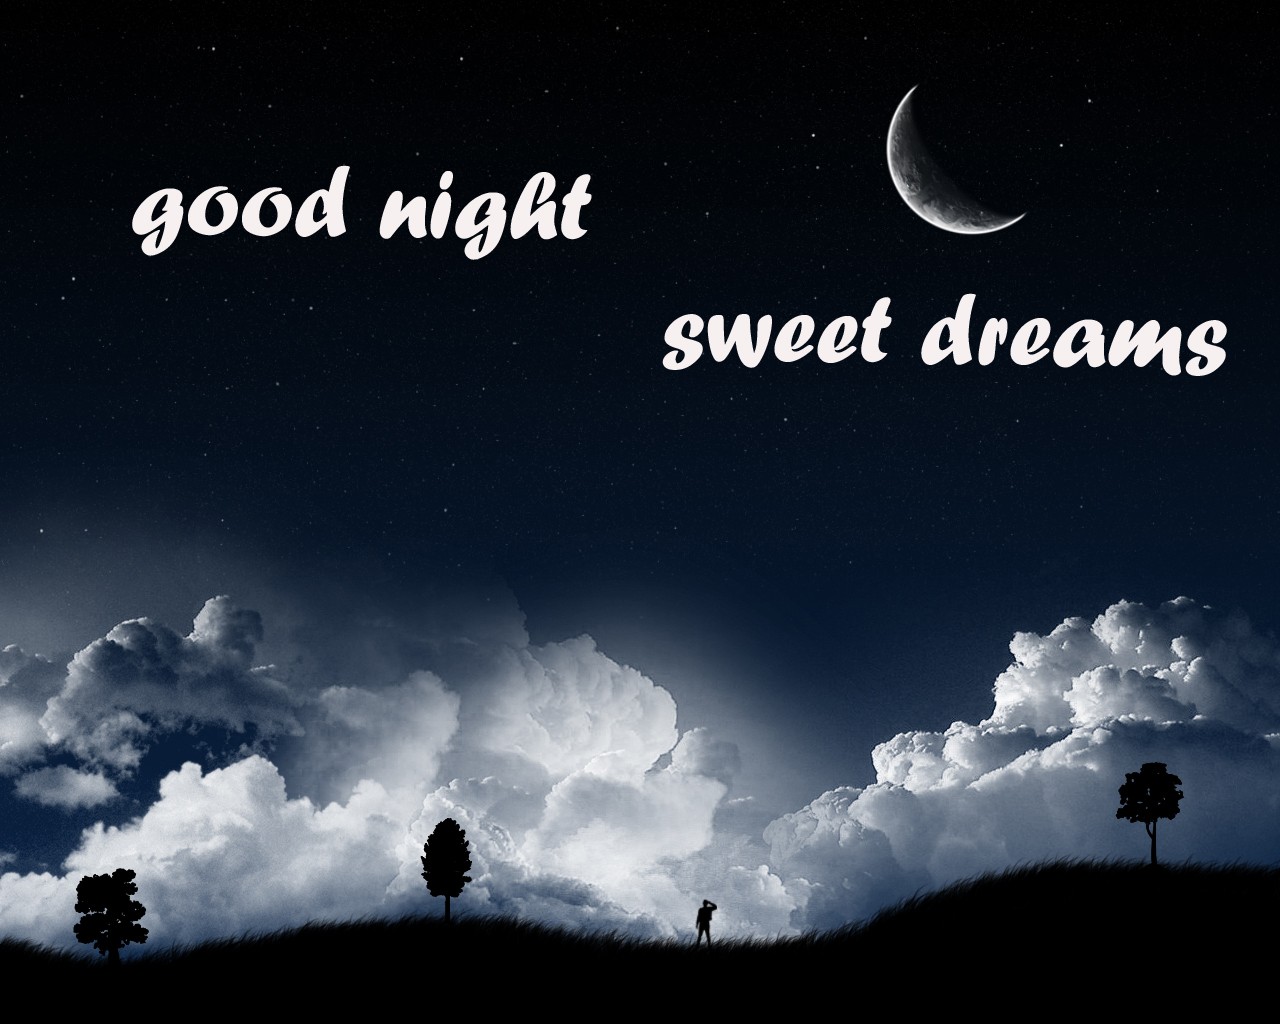 25 Wonderful Good Night Images Download For Whatsapp Good Night Poetry   Mixing Images